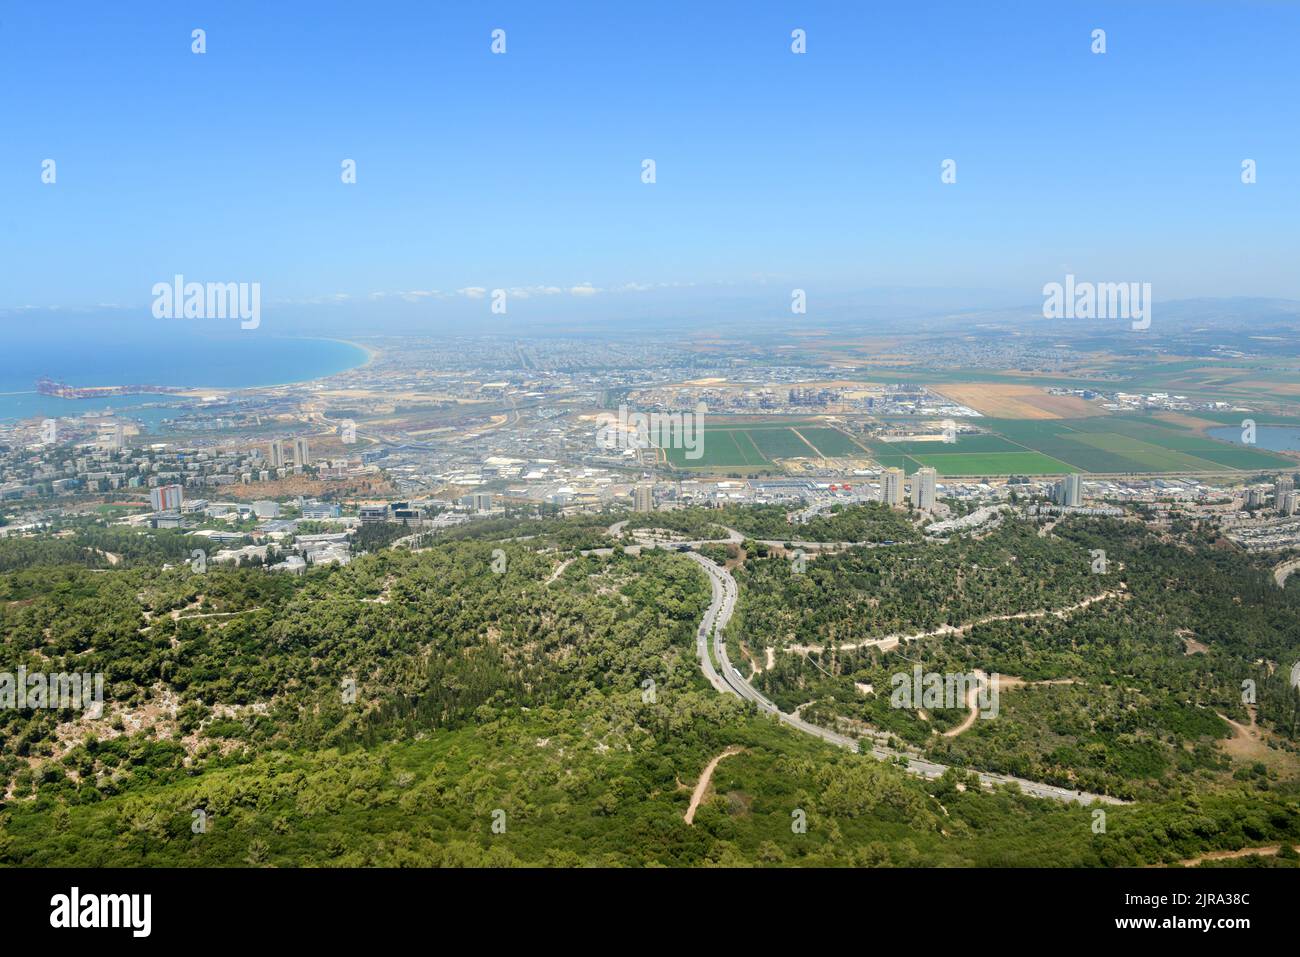 View of the Carmel mountains and the valley behind it as seen from the University of Haifa, Israel. Stock Photo